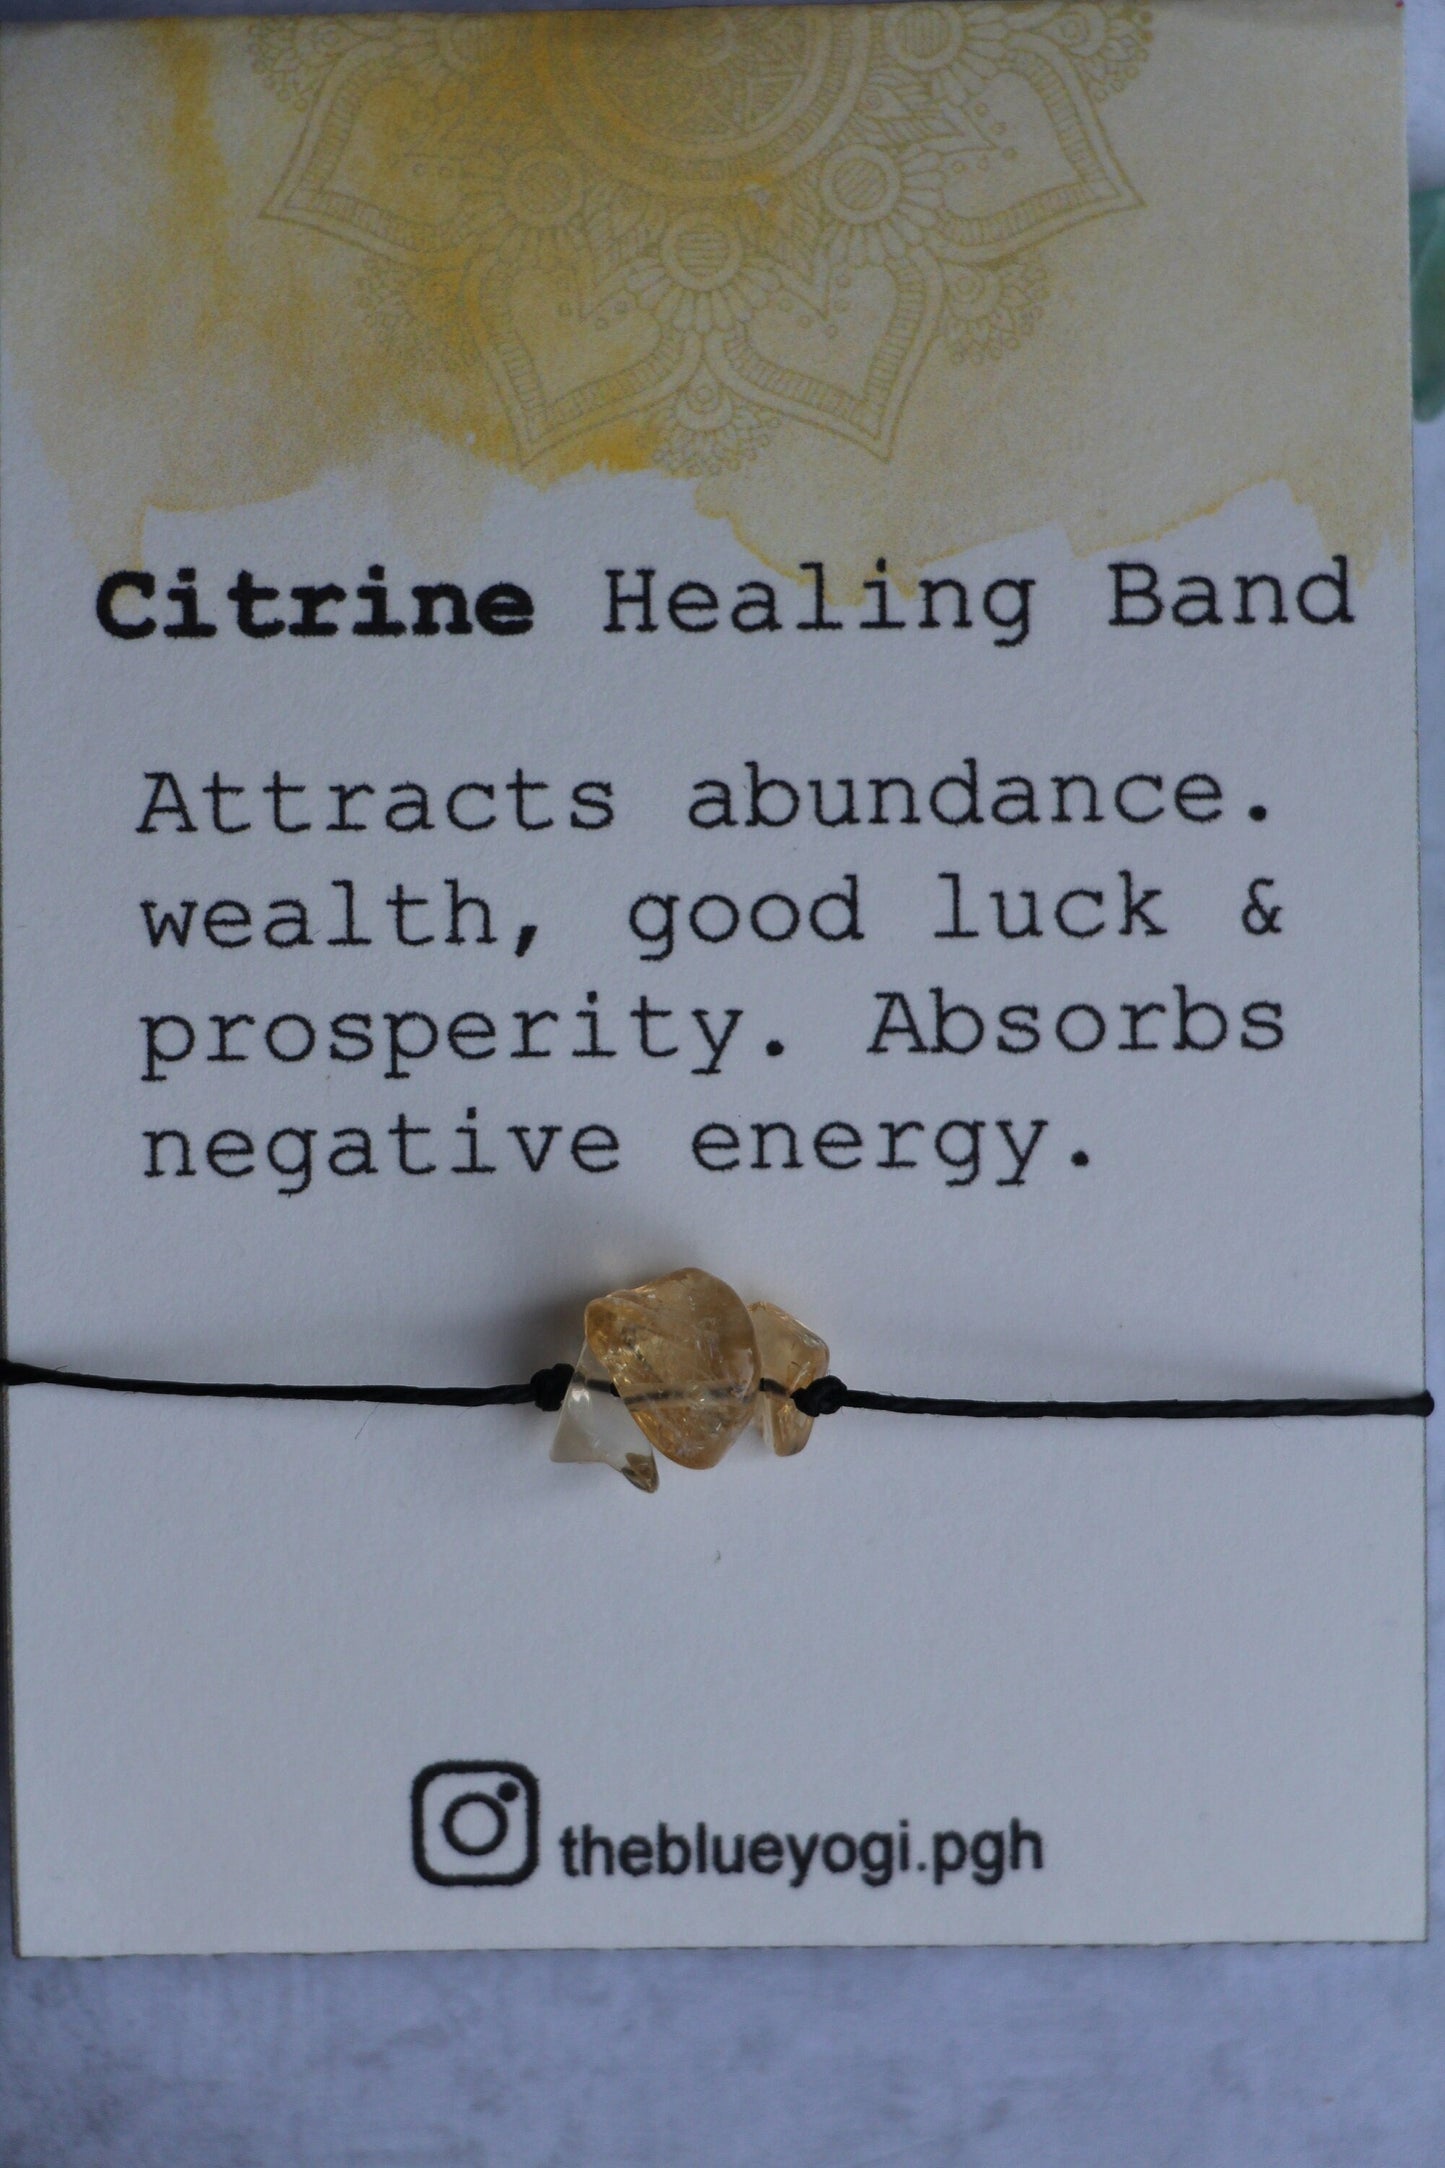 Citrine Healing Band with an Affirmation